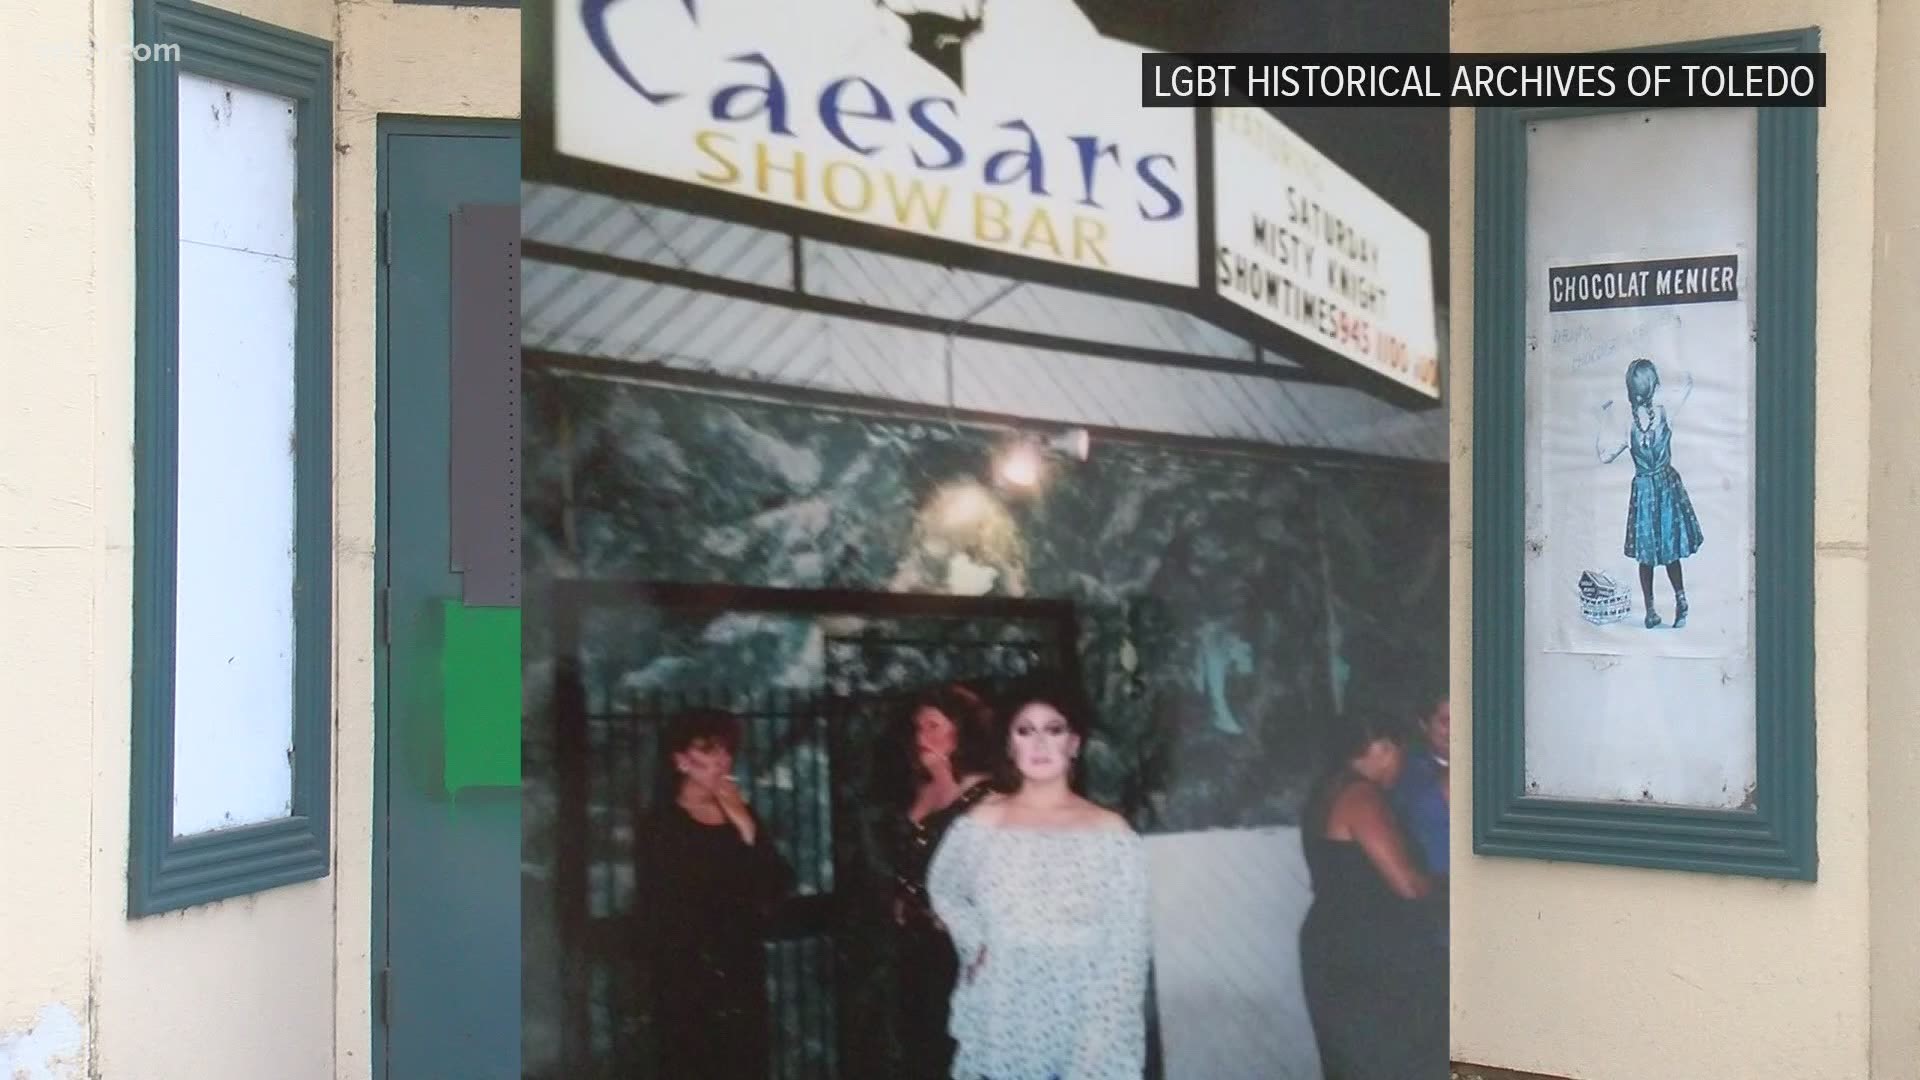 Many of the places that people once went to for acceptance and belonging sit empty and abandoned. Here's a look at the then and now of LGBTQ+ safe spaces in Toledo.